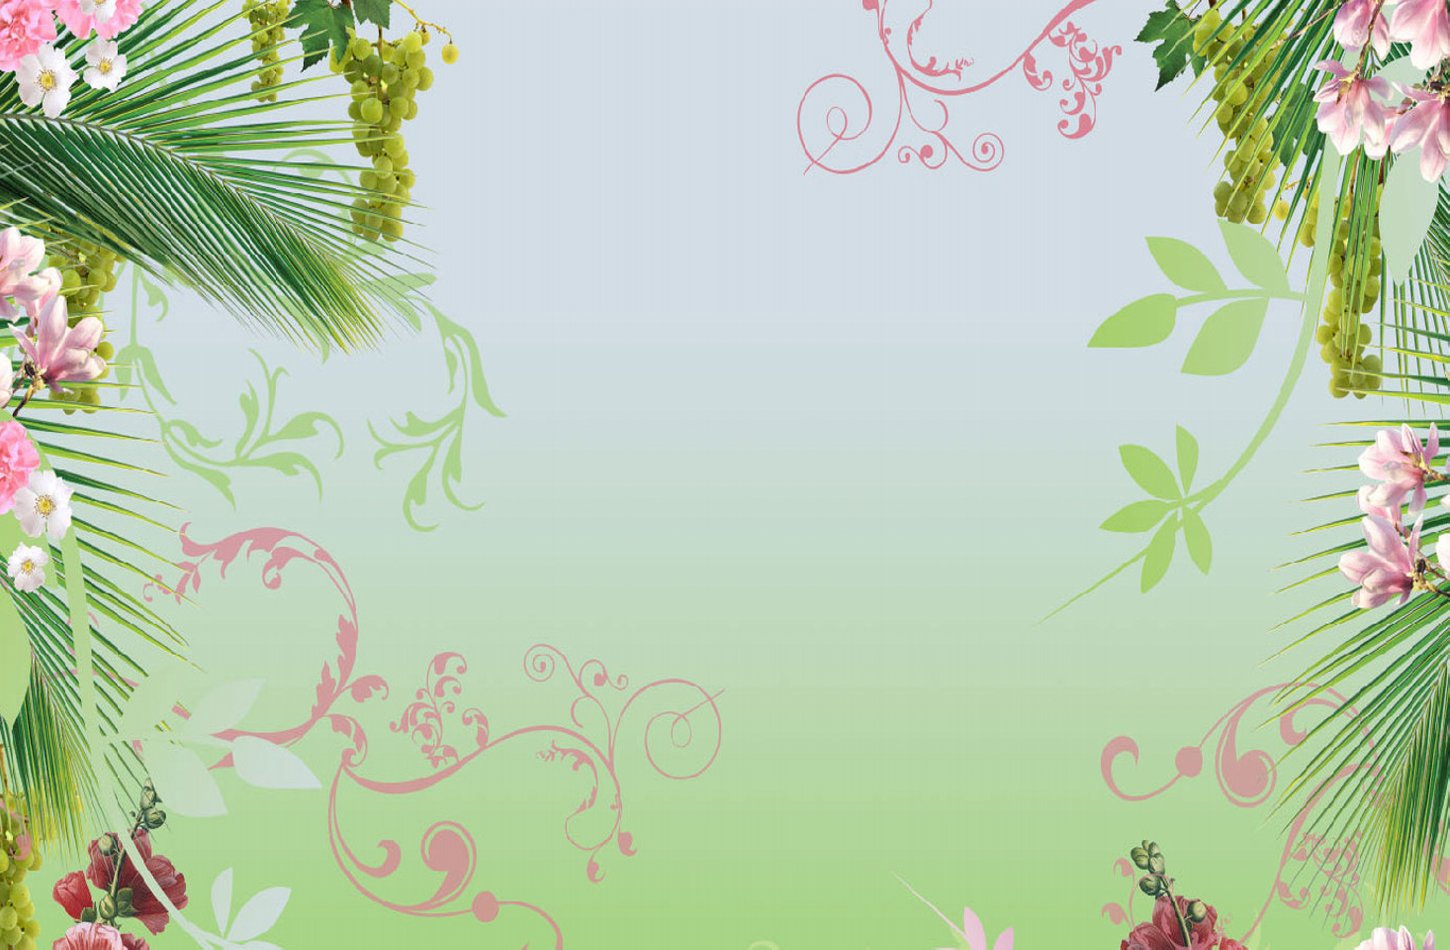 Spring Flowers Twitter Backgrounds, Spring Flowers - Green And Pink Background - HD Wallpaper 